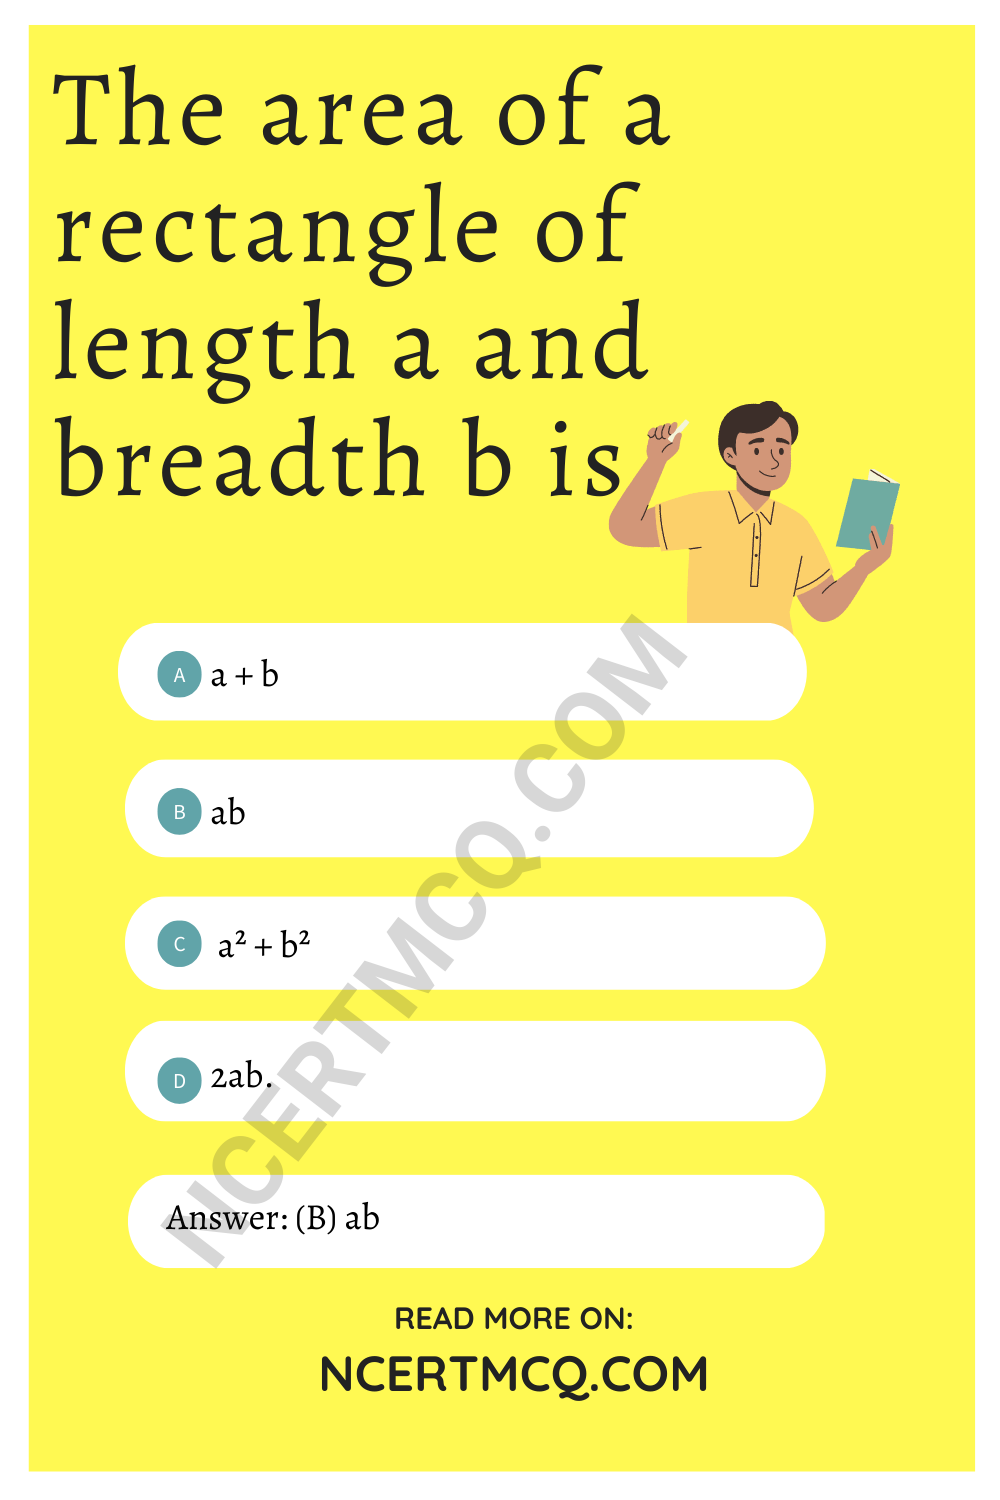 The area of a rectangle of length a and breadth b is